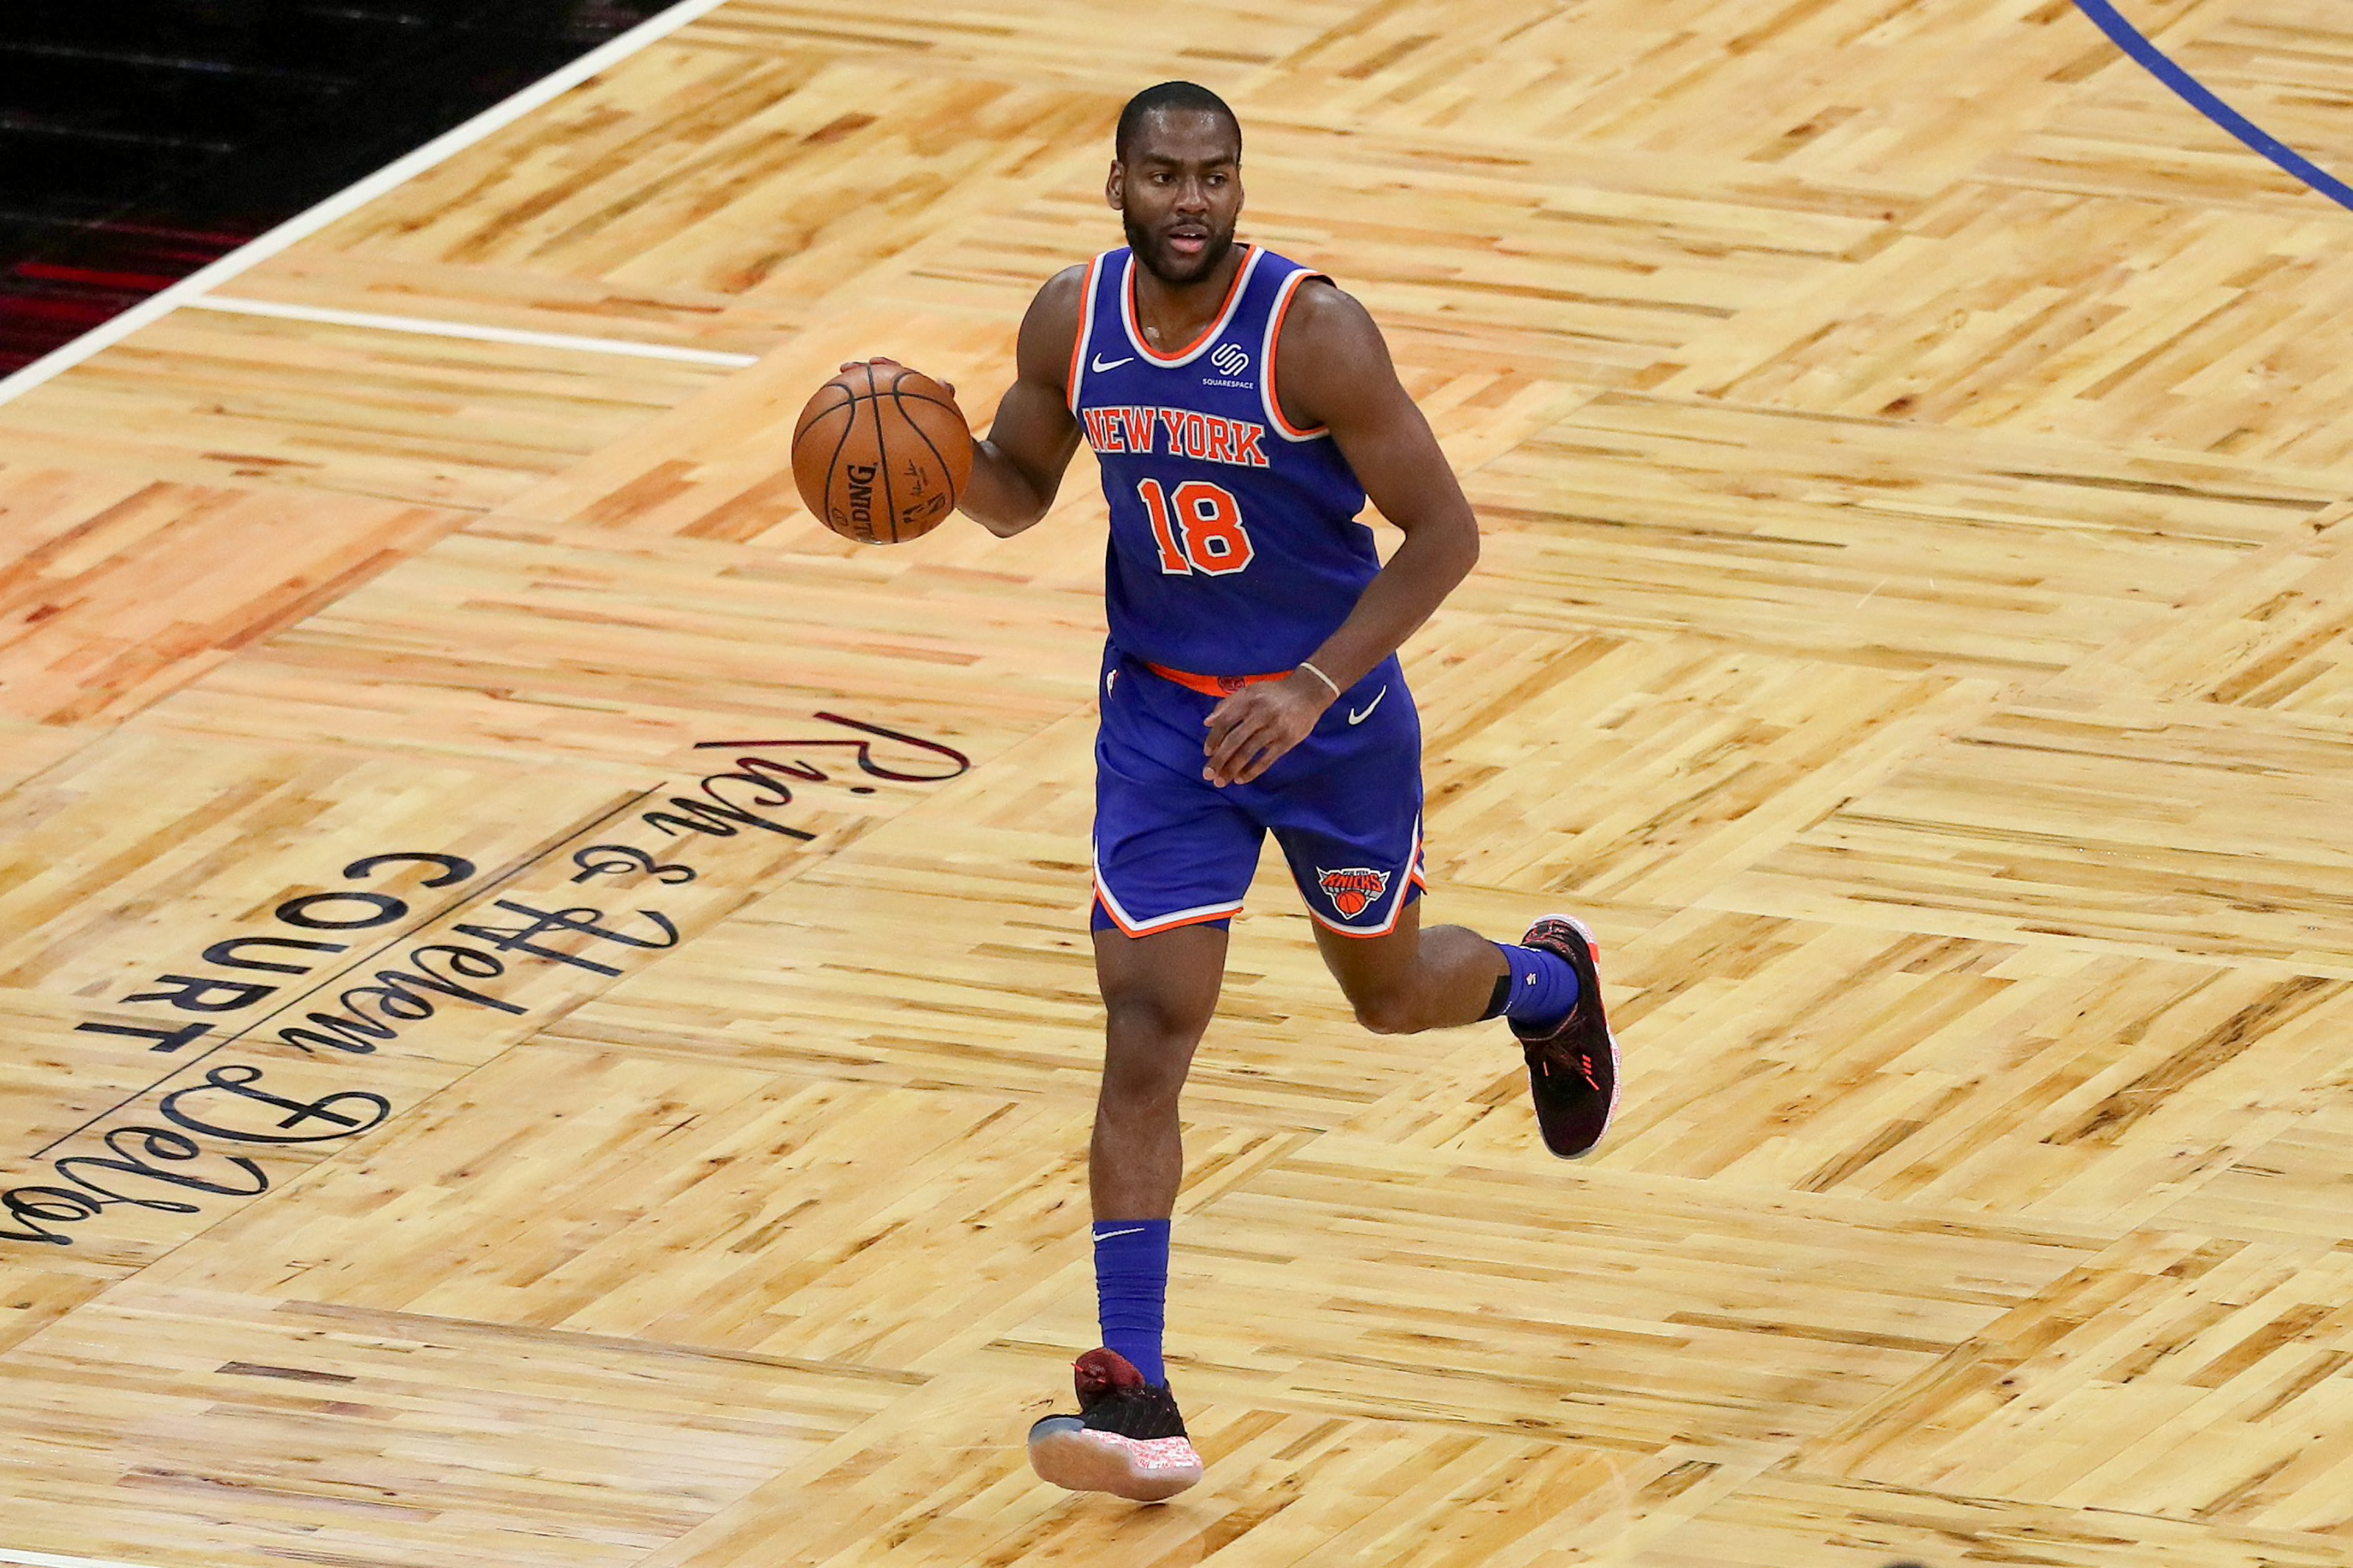 Alec Burks quietly leading in the clutch for surging Knicks